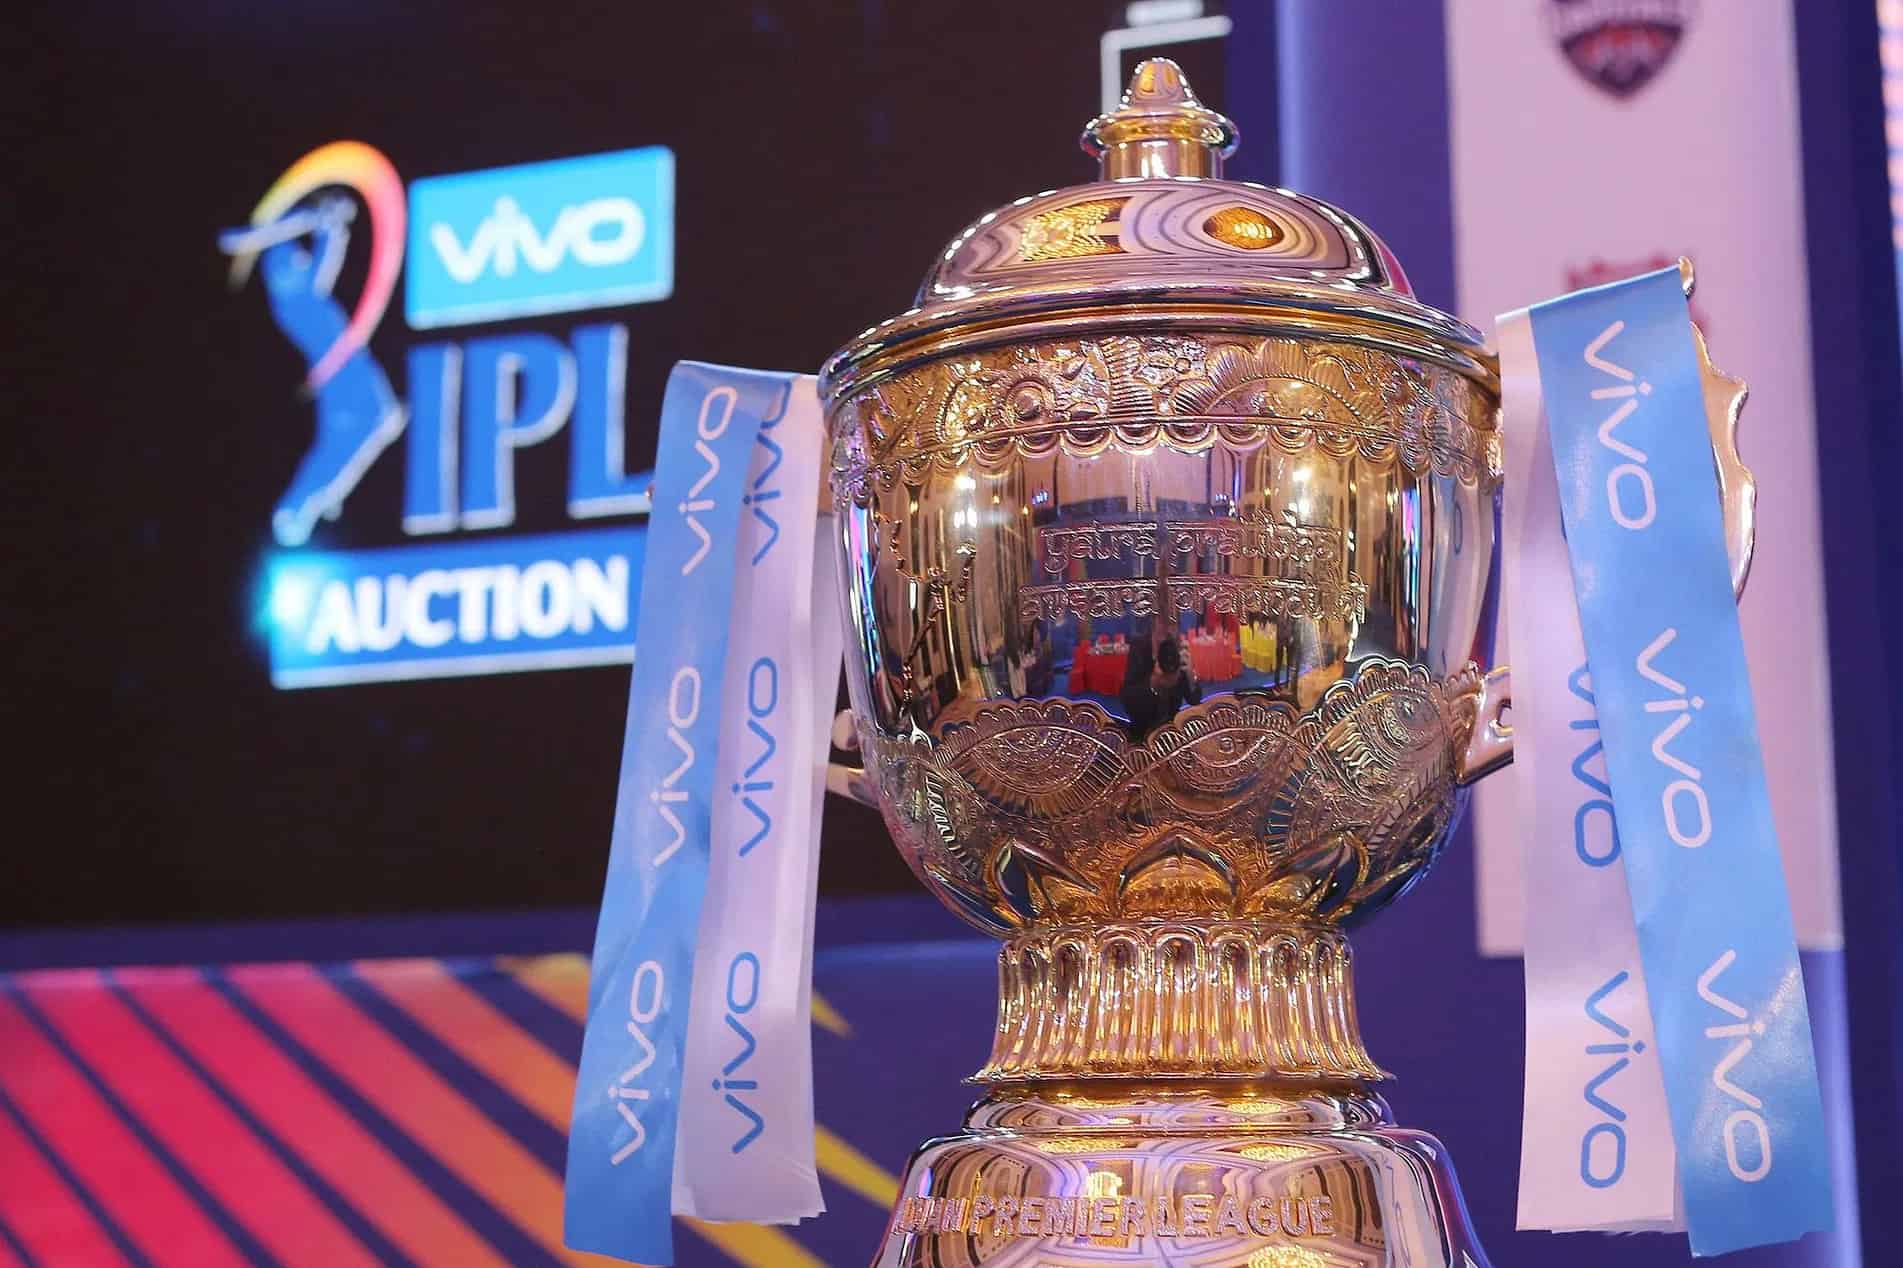 IPL 2023 Impact Player Rule: How does it work, when it will be used? - Fully Explained